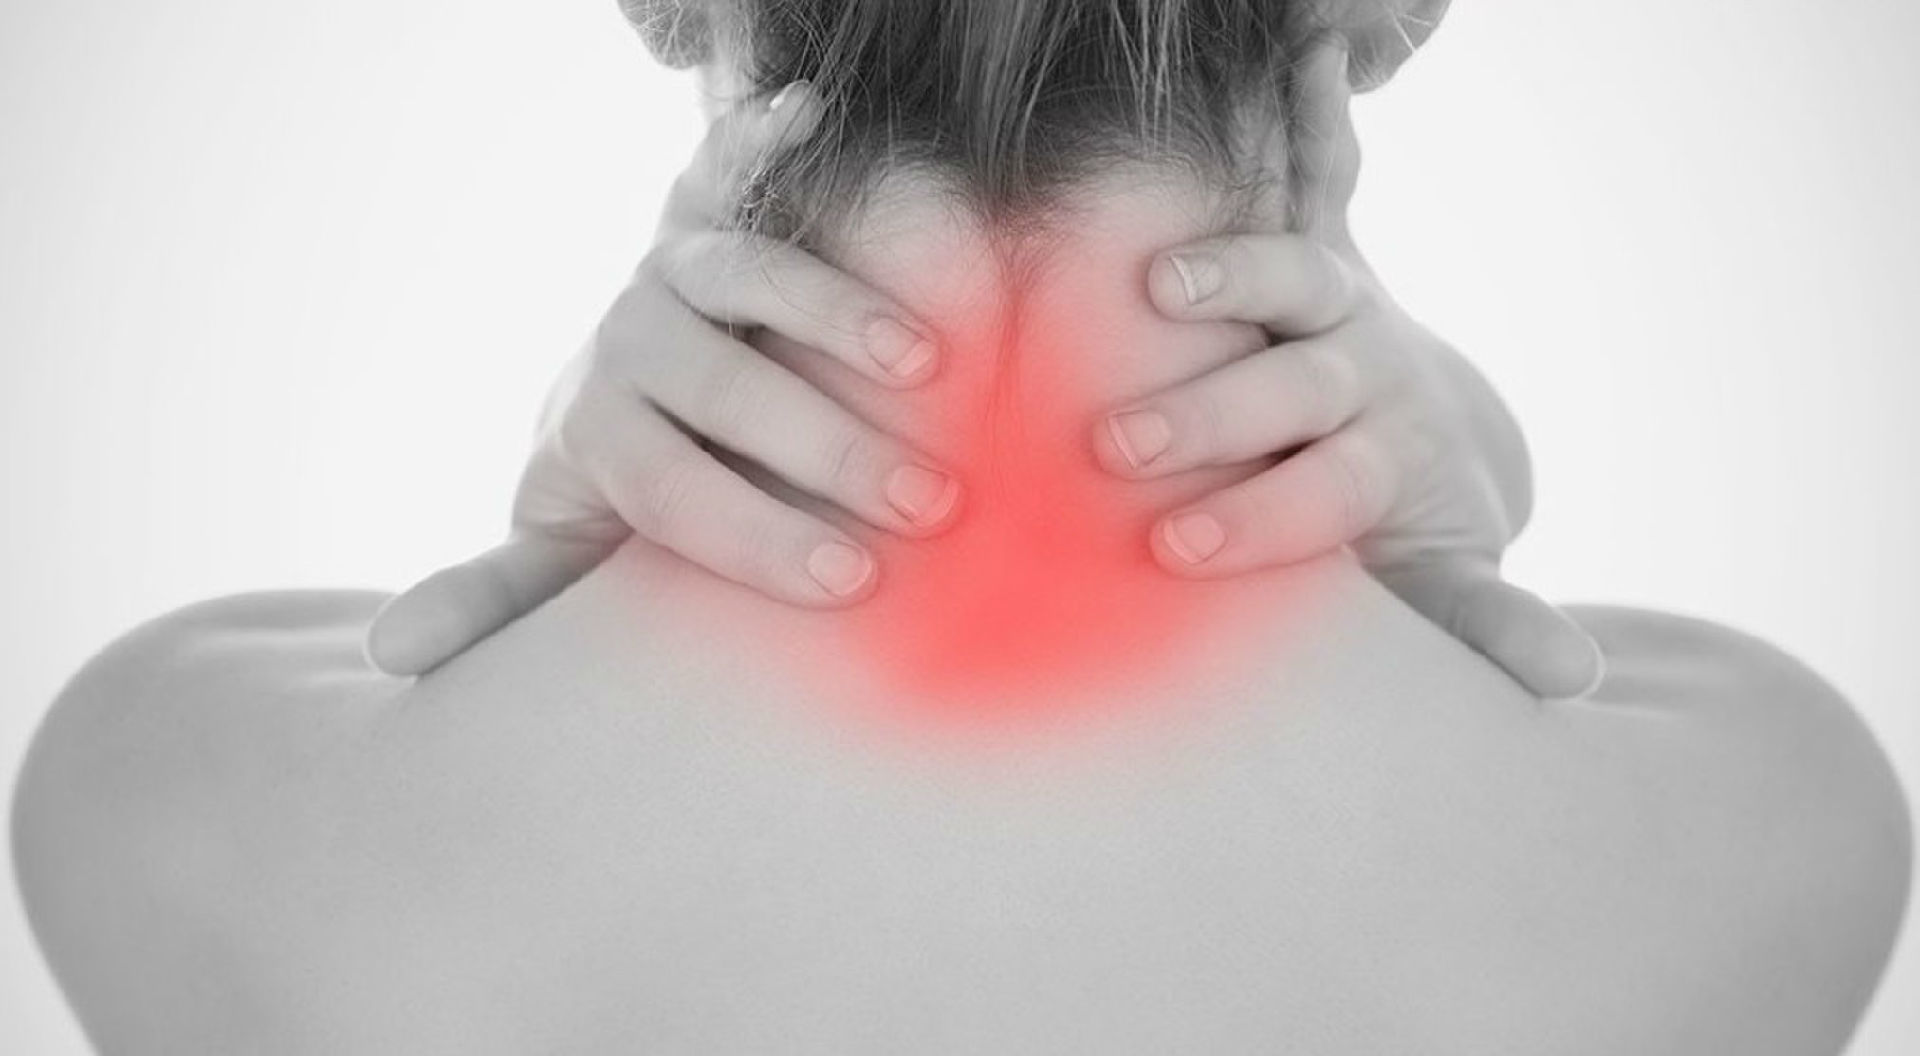 The chiropractor will tell you what causes cervical pain